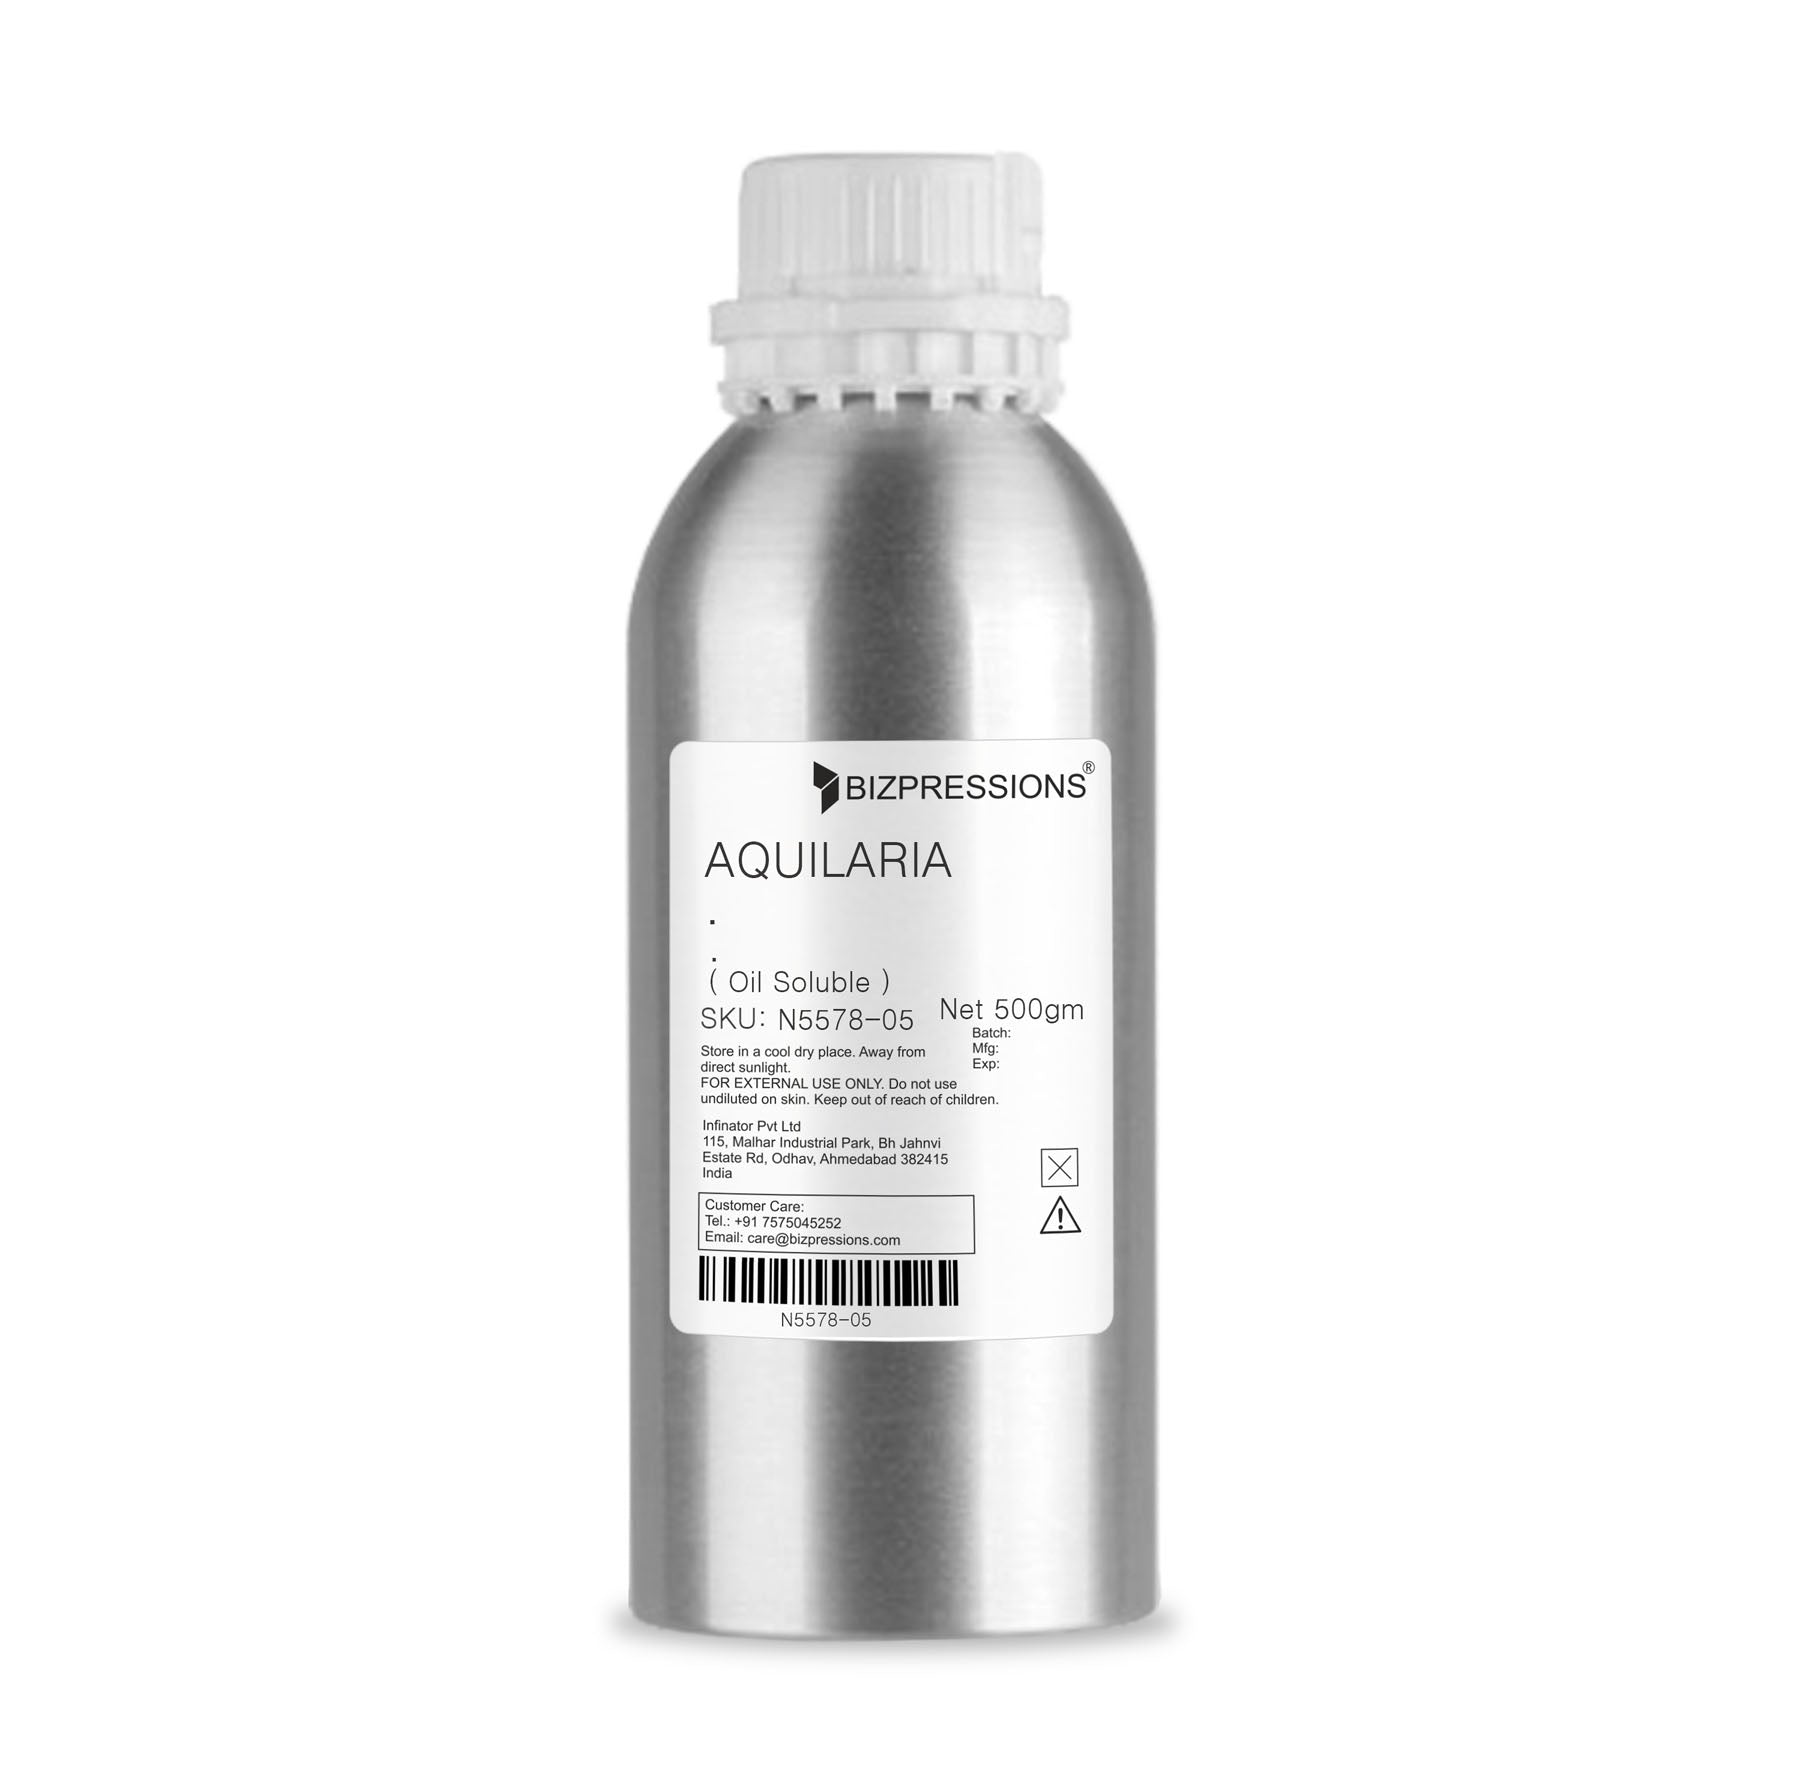 AQUILARIA - Fragrance ( Oil Soluble ) - 500 gm